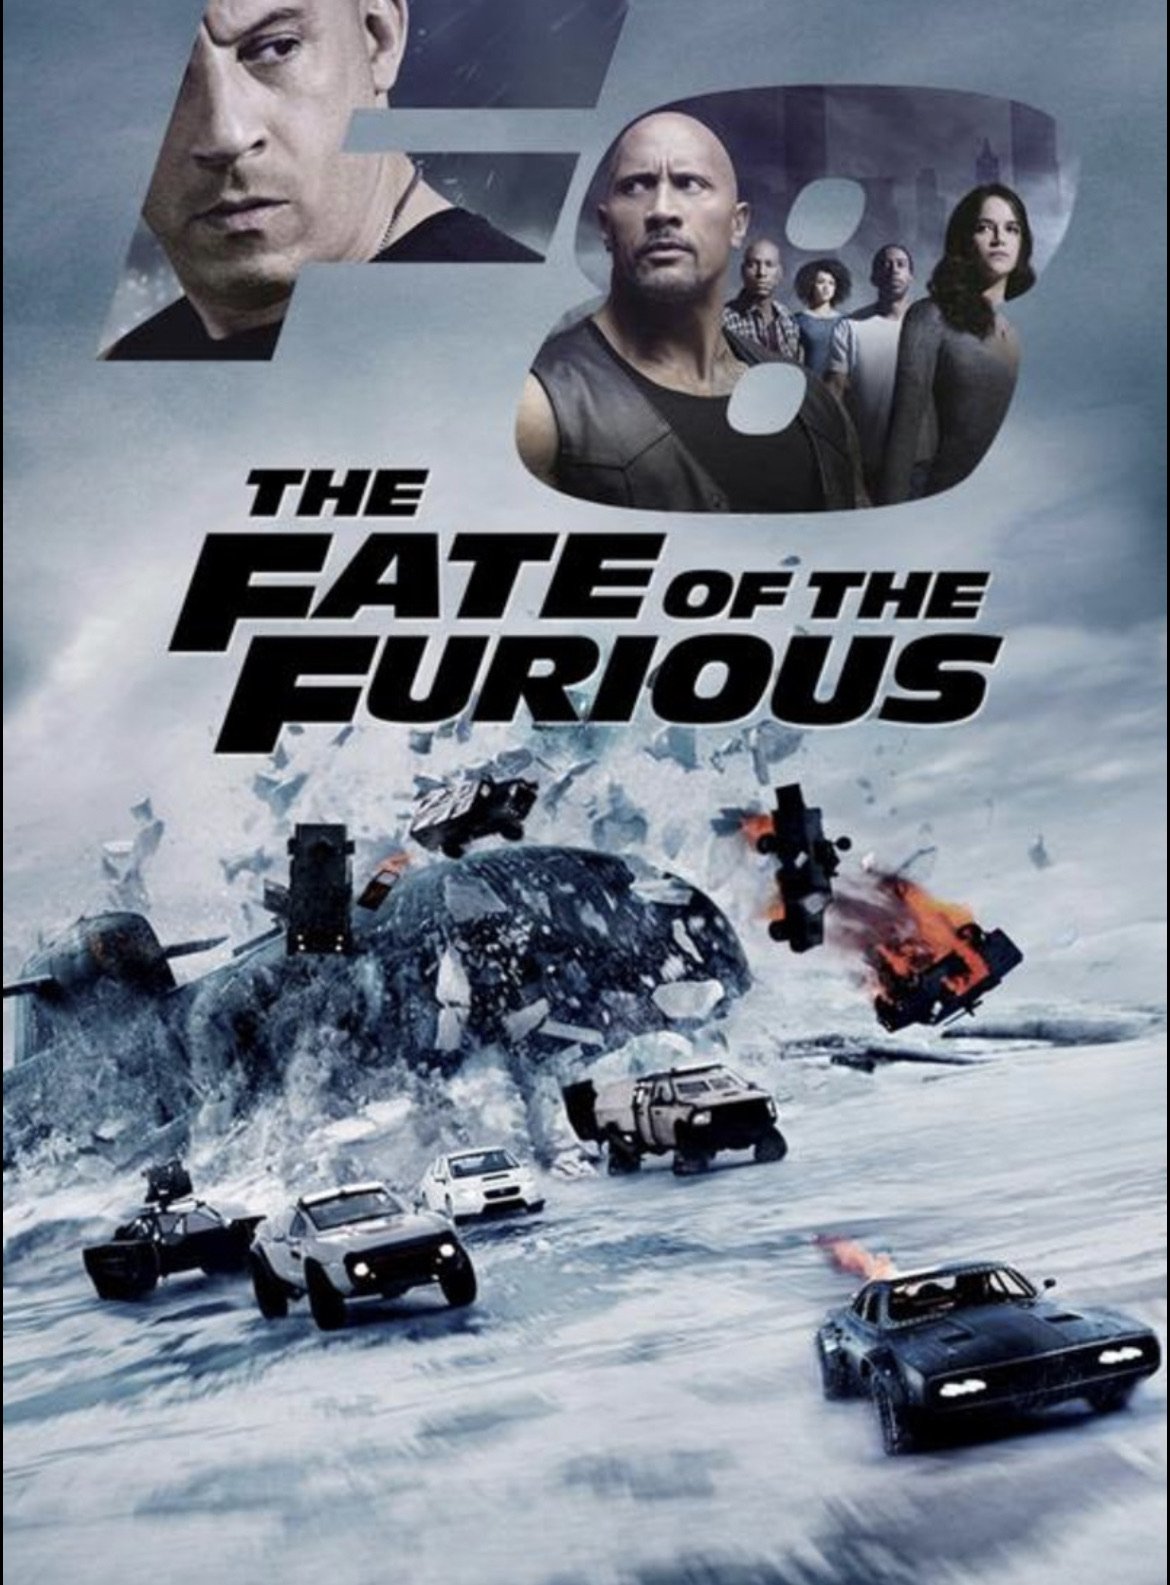 The Fate of the Furious (2017) [Theatrical Edition] Vudu or Movies Anywhere HD redemption only